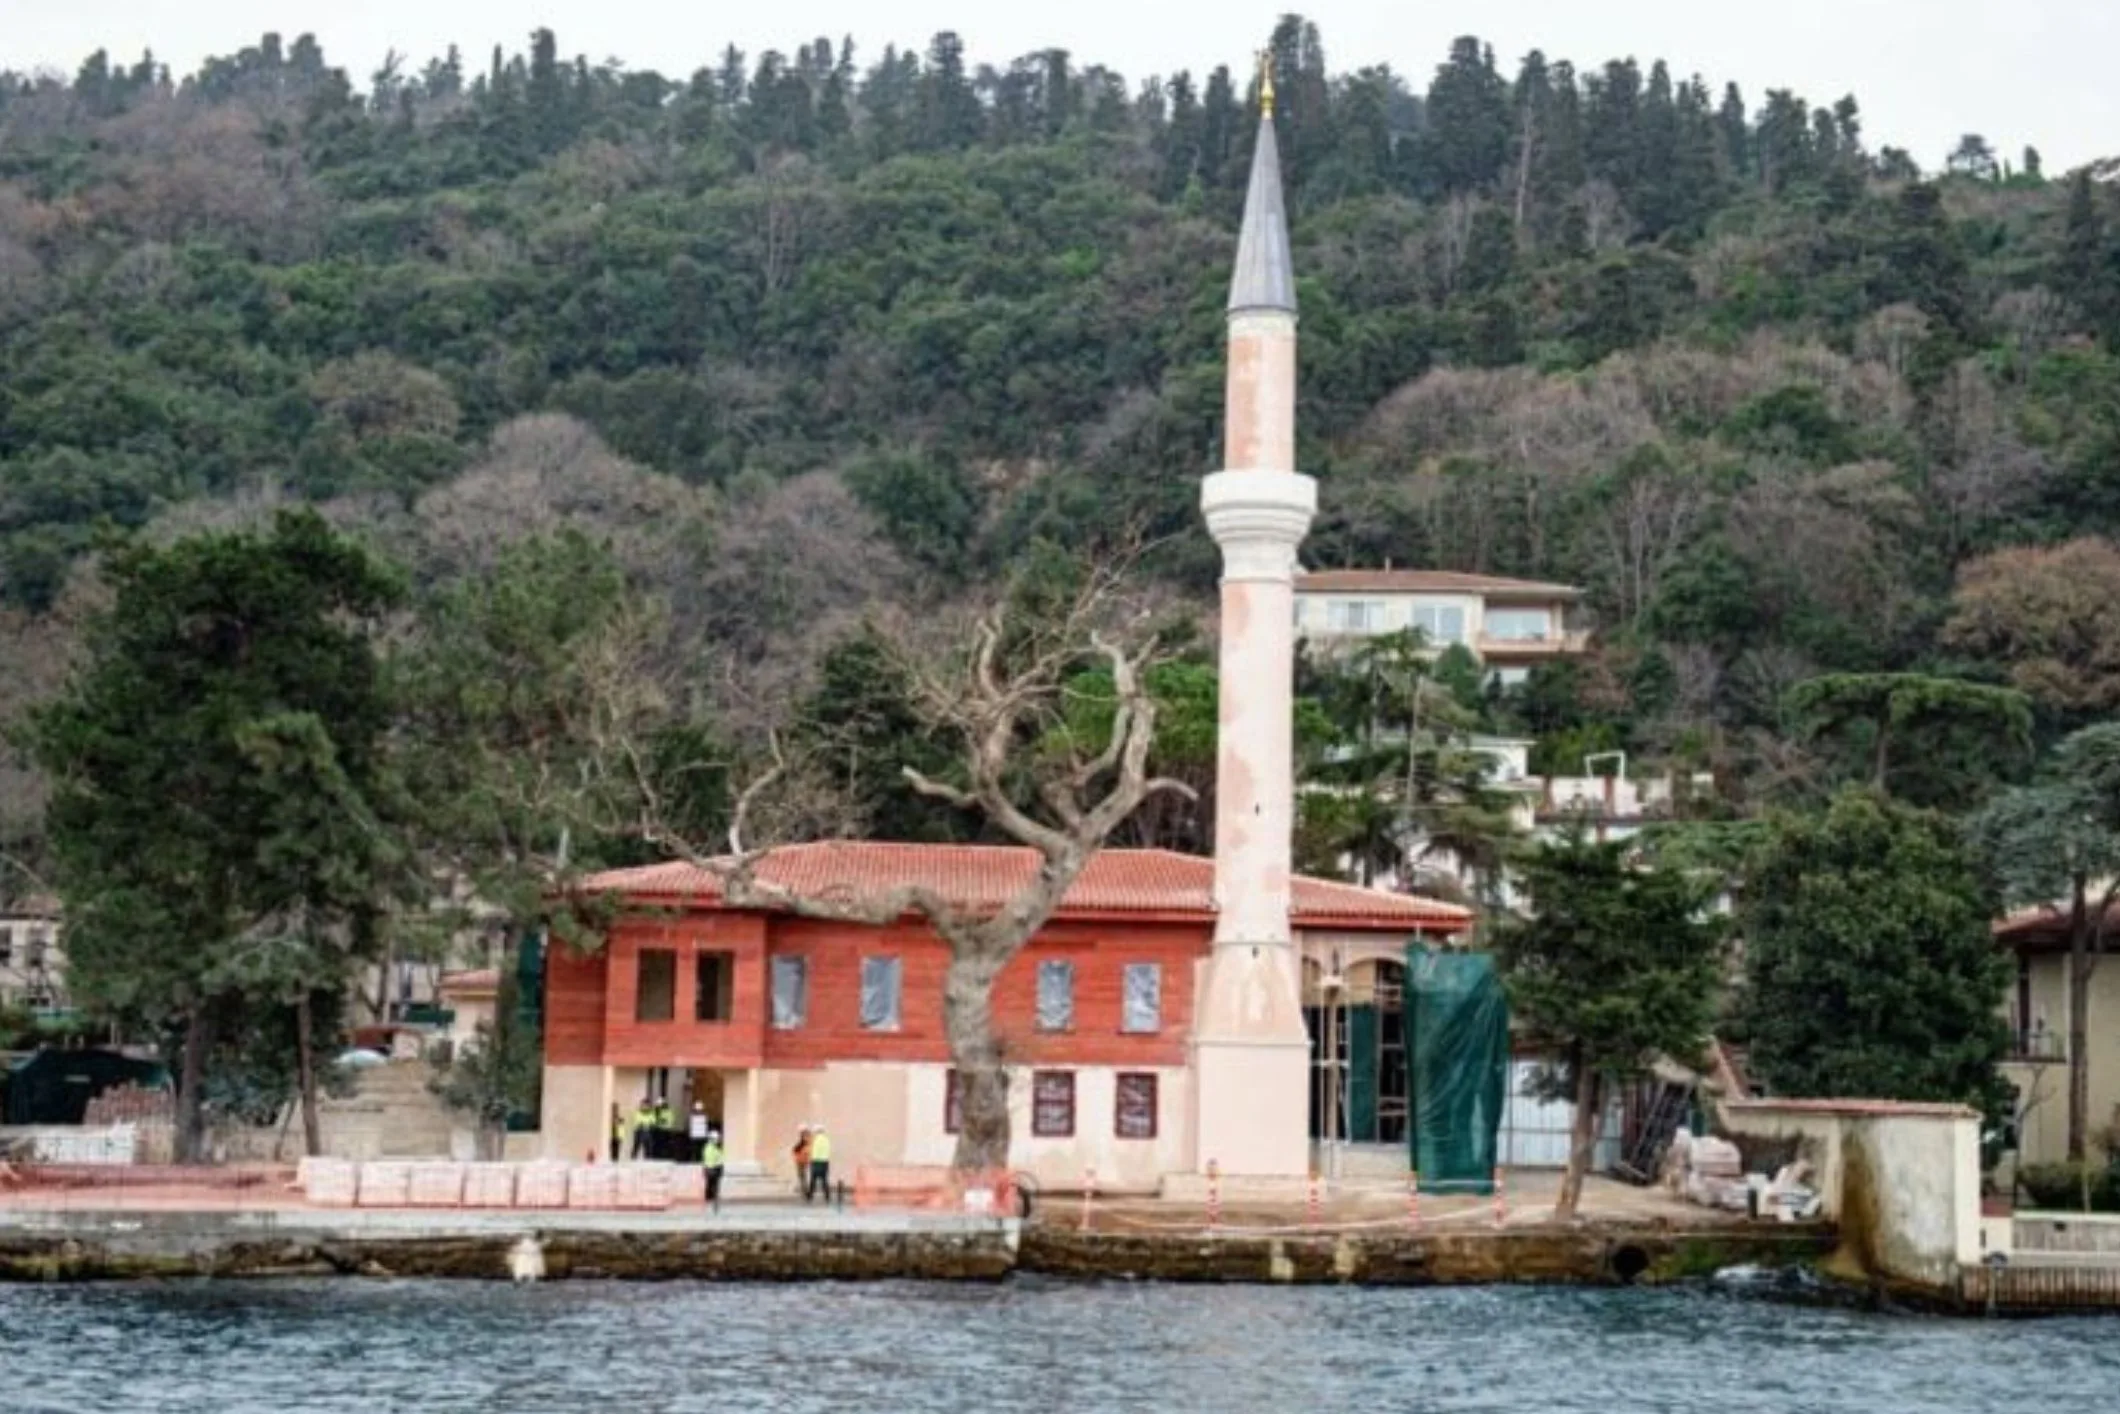 Turkey: The historic Vaniköy Mosque, Which Was Devastated By Fire, Has Been Rebuilt